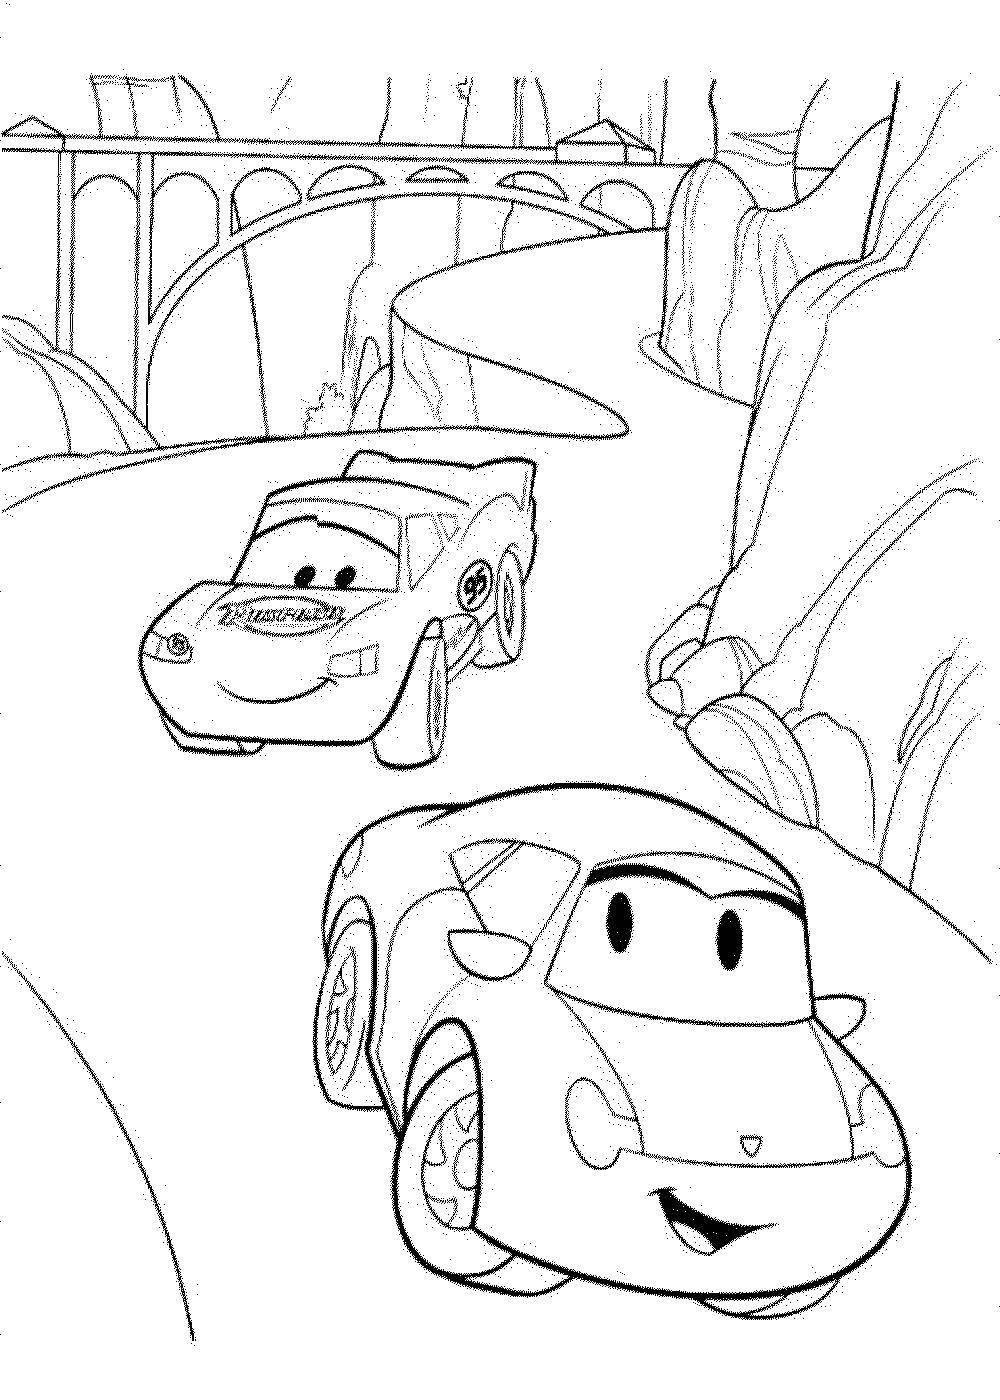 Coloring Lightning McQueen in the mountains. Category Wheelbarrows. Tags:  lightning McQueen, mountains, cars.